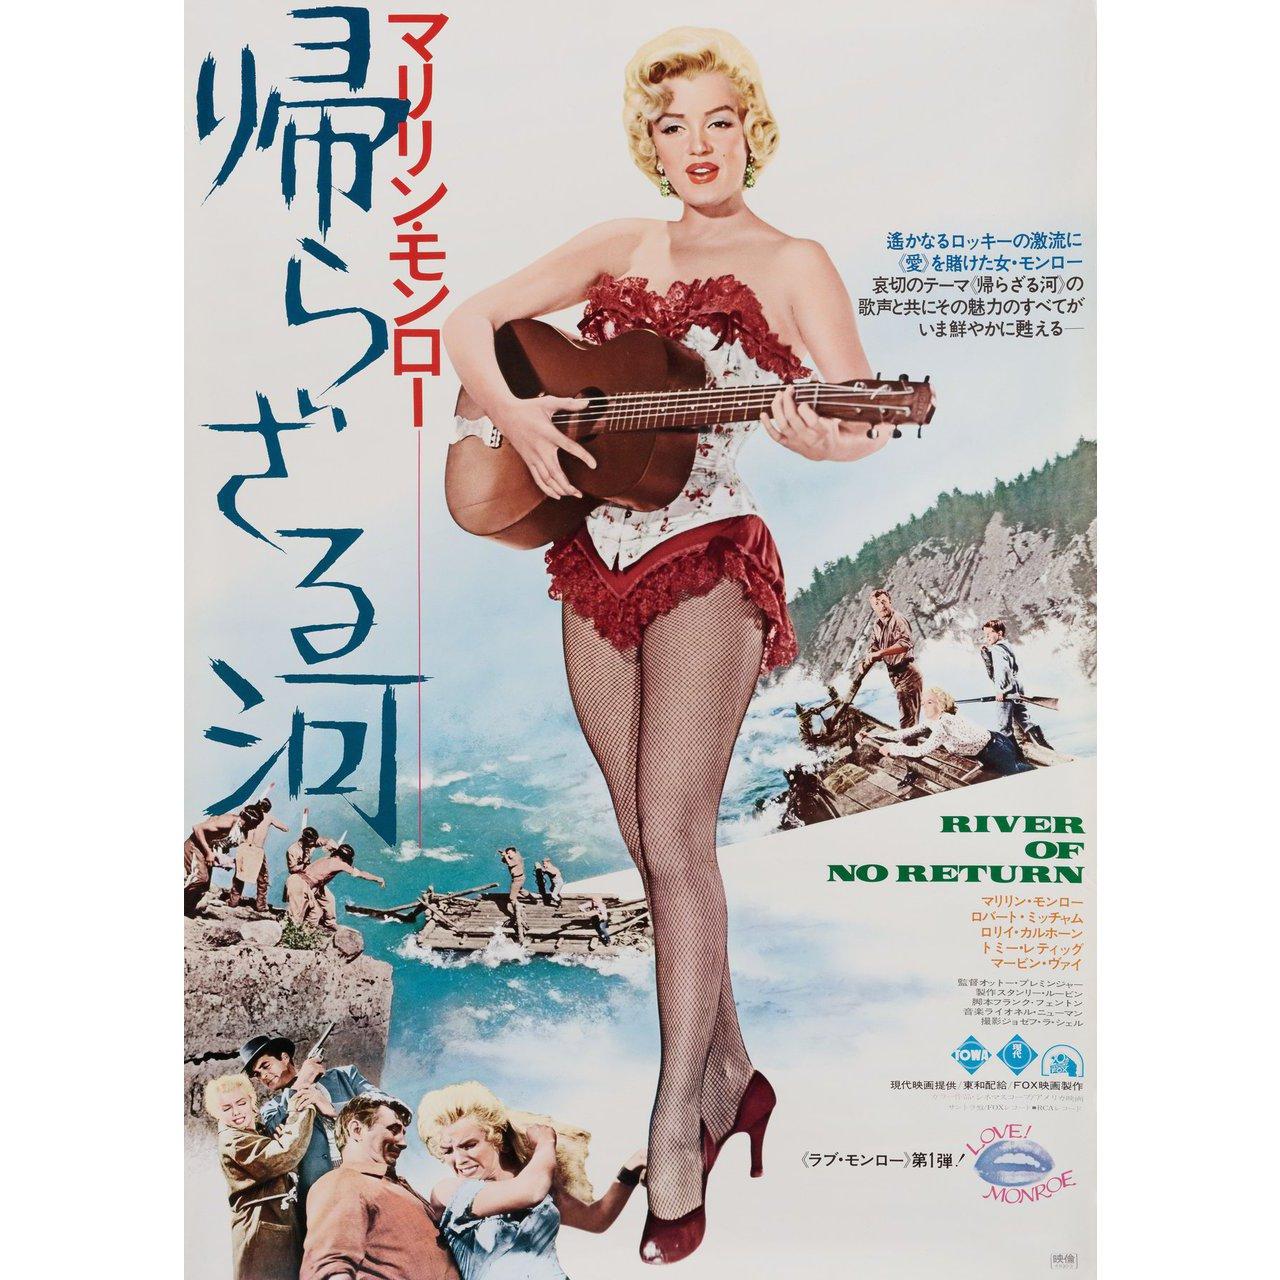 Original 1974 re-release Japanese B2 poster for the 1954 film River of No Return directed by Otto Preminger / Jean Negulesco with Robert Mitchum / Marilyn Monroe / Rory Calhoun / Tommy Rettig. Very Good-Fine condition, rolled. Please note: the size